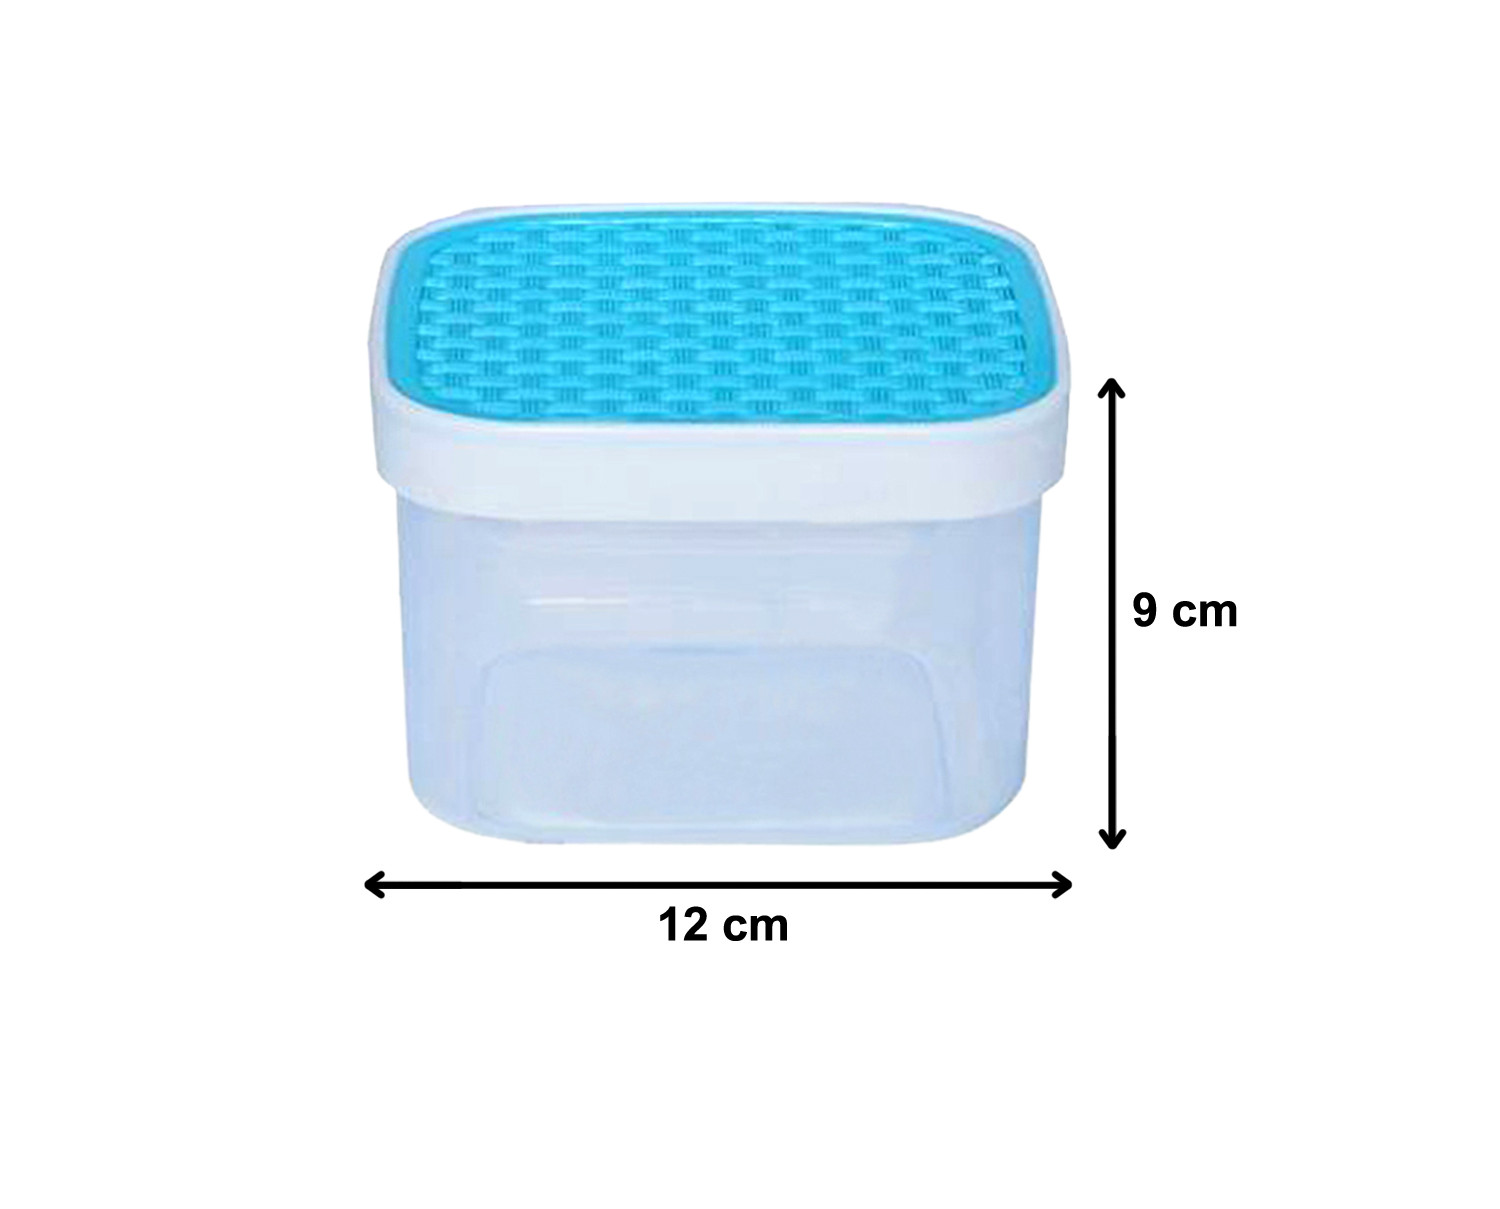 Kuber Industries Check Deisgn Lid  Multi Purpose Plastic Container,1200ml, Set of 6 (Grey & Blue)